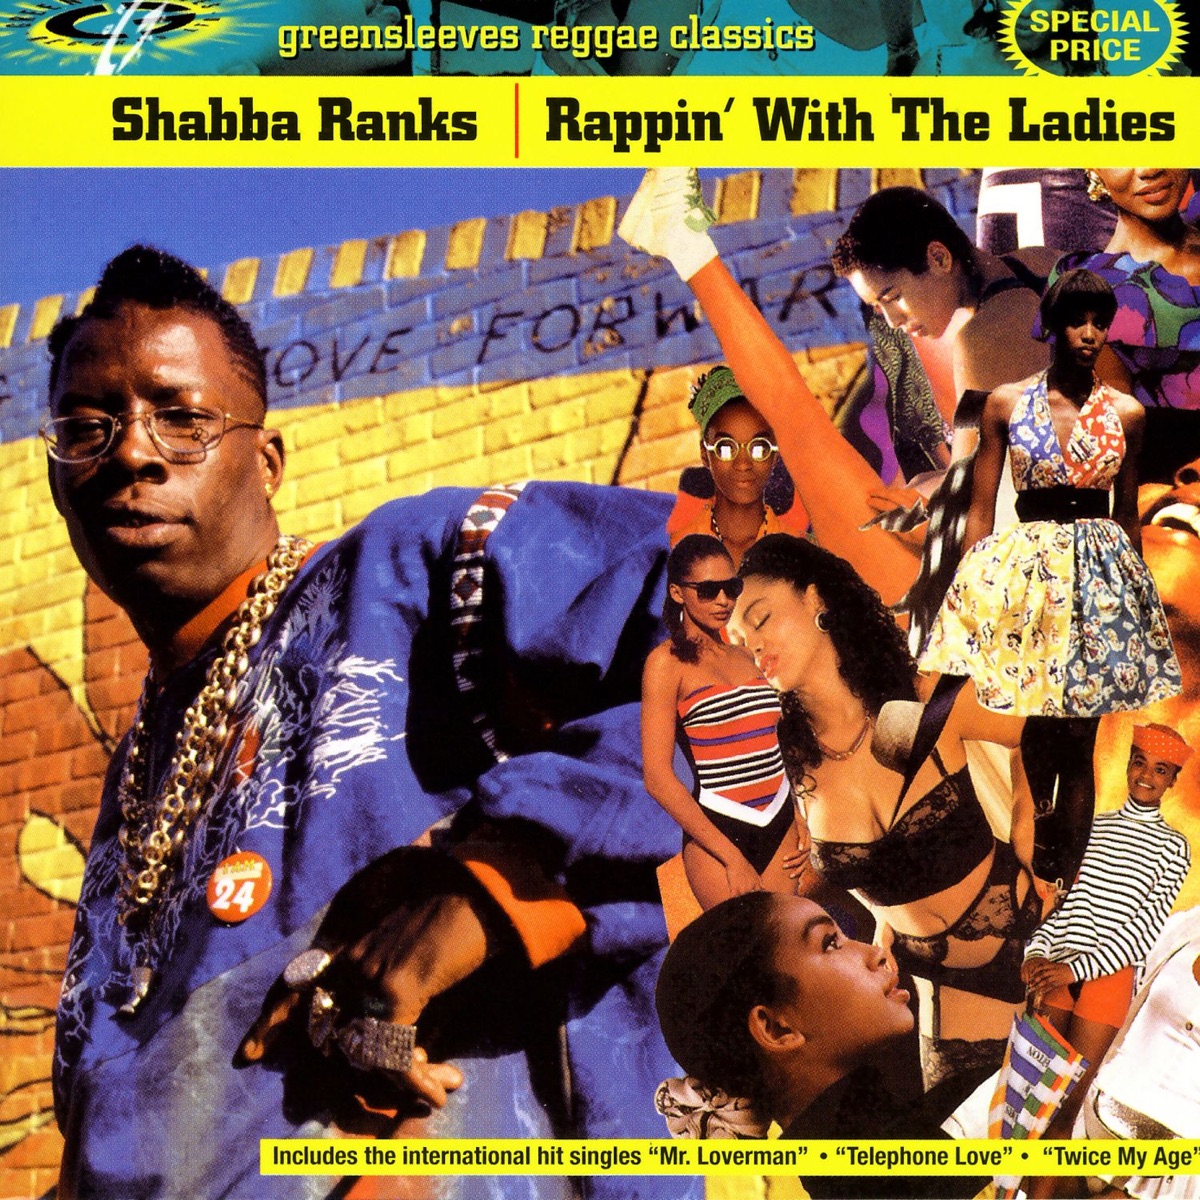 ‎Rappin' With the Ladies by Shabba Ranks on Apple Music